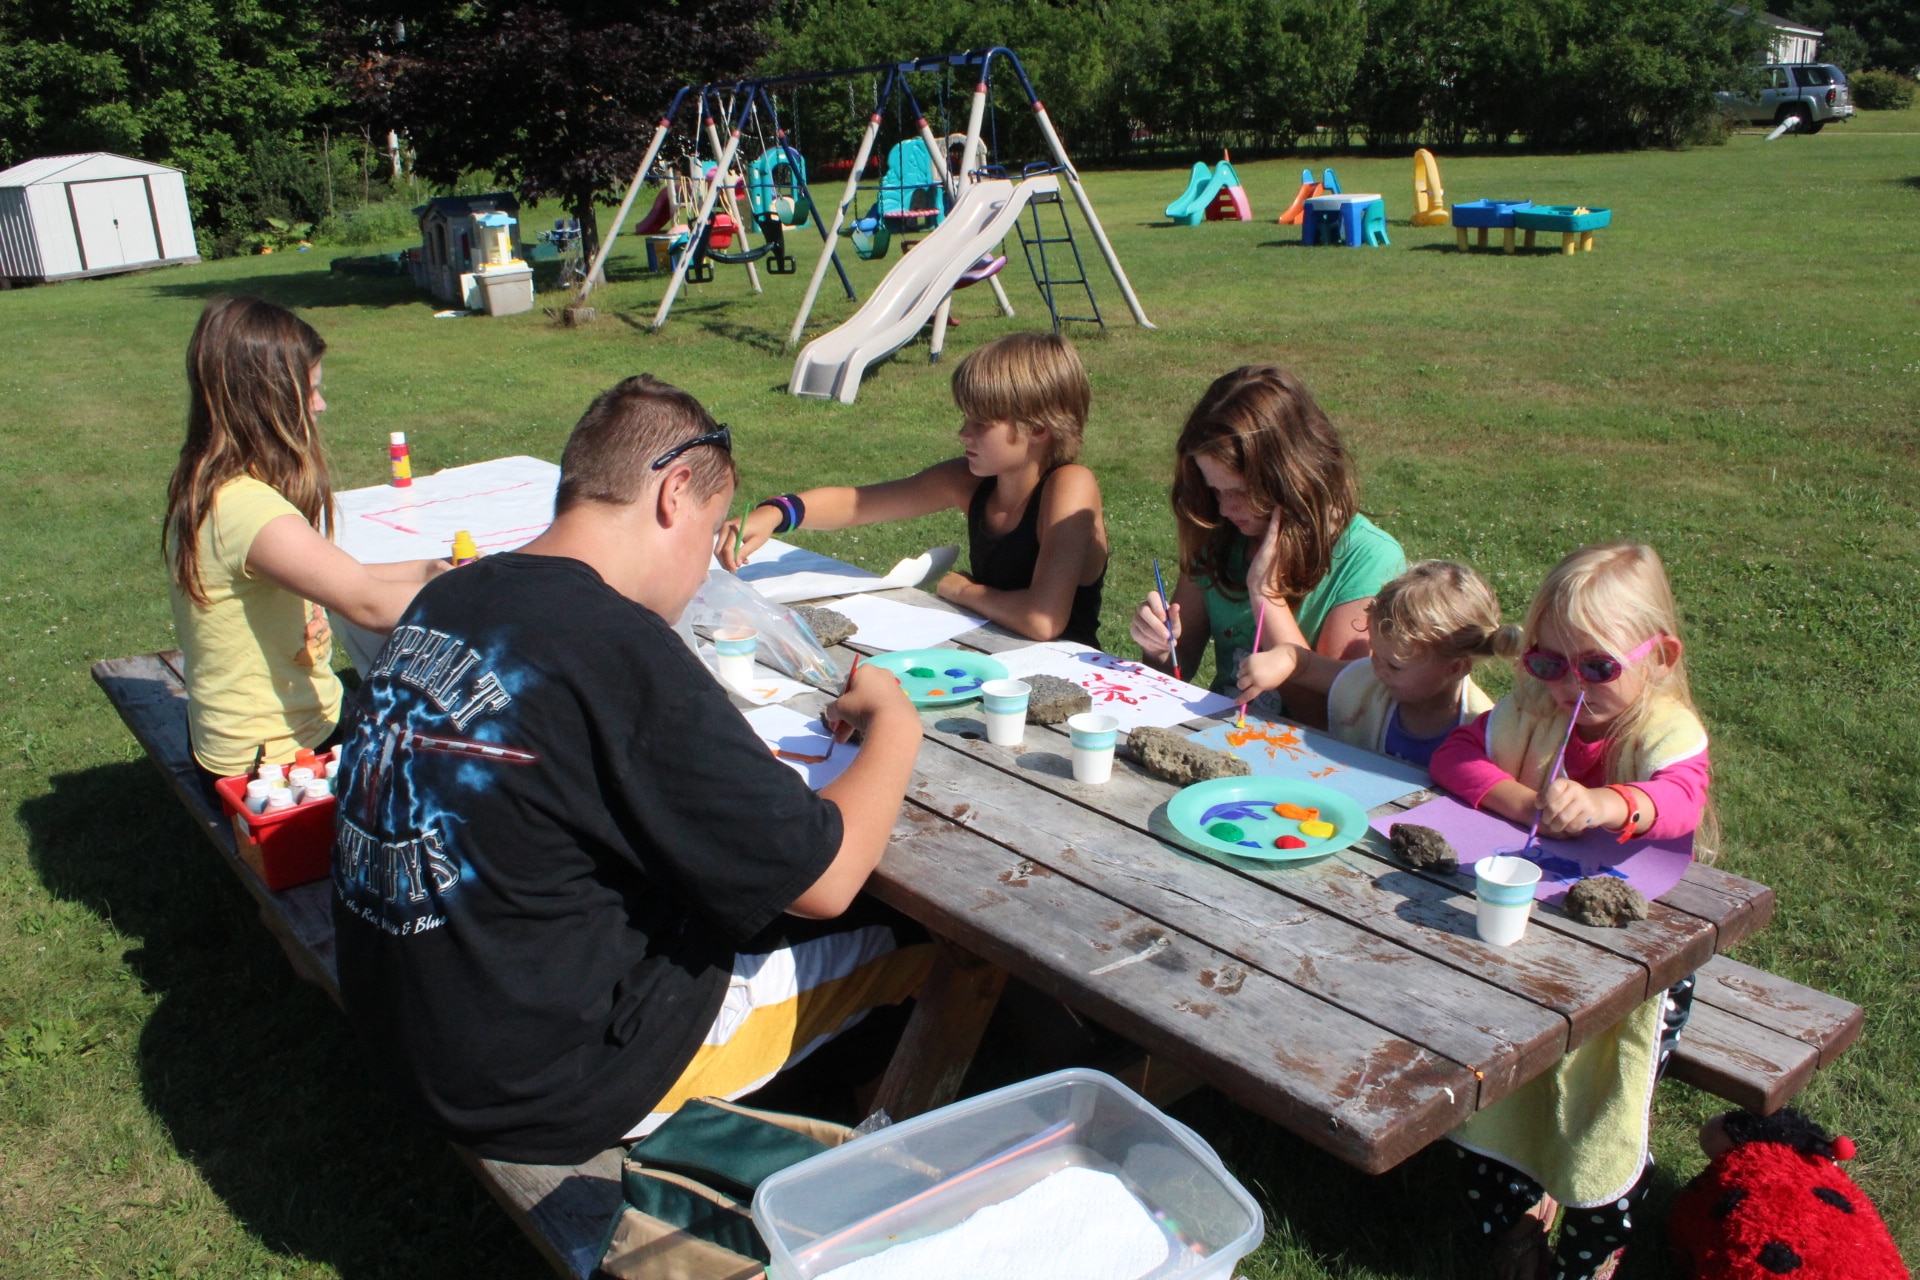 A diverse group of individuals enjoying finger-painting outdoors while sitting at a picnic table